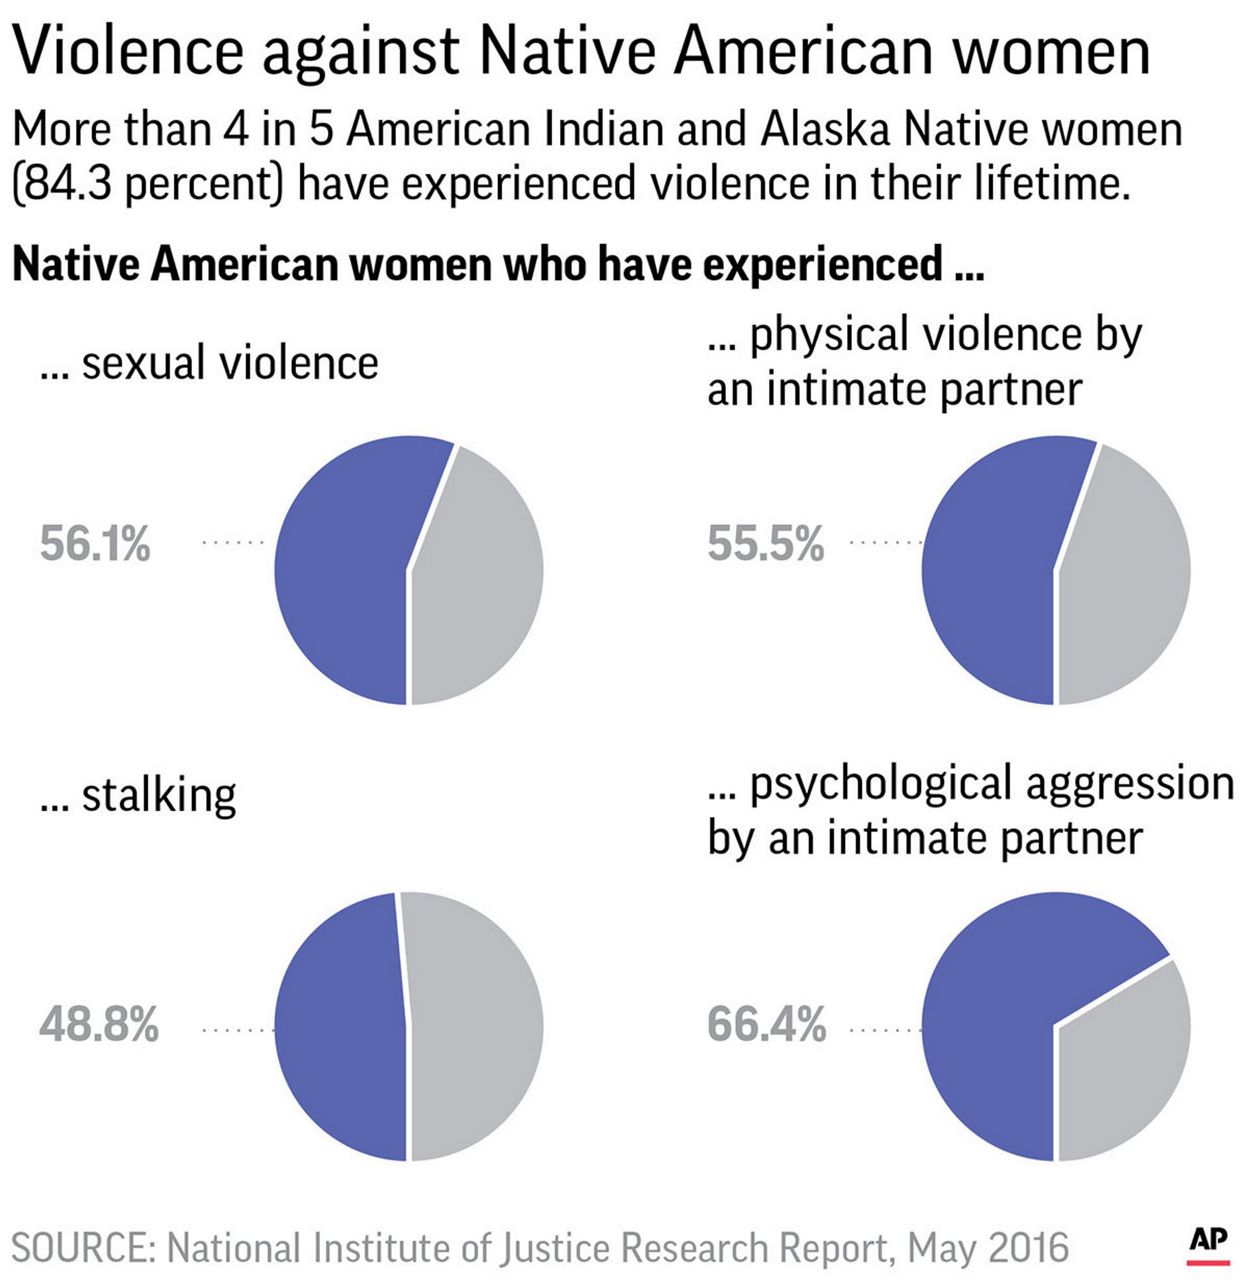 Feds Plan Funding Boost To Fight Assaults On Native Women